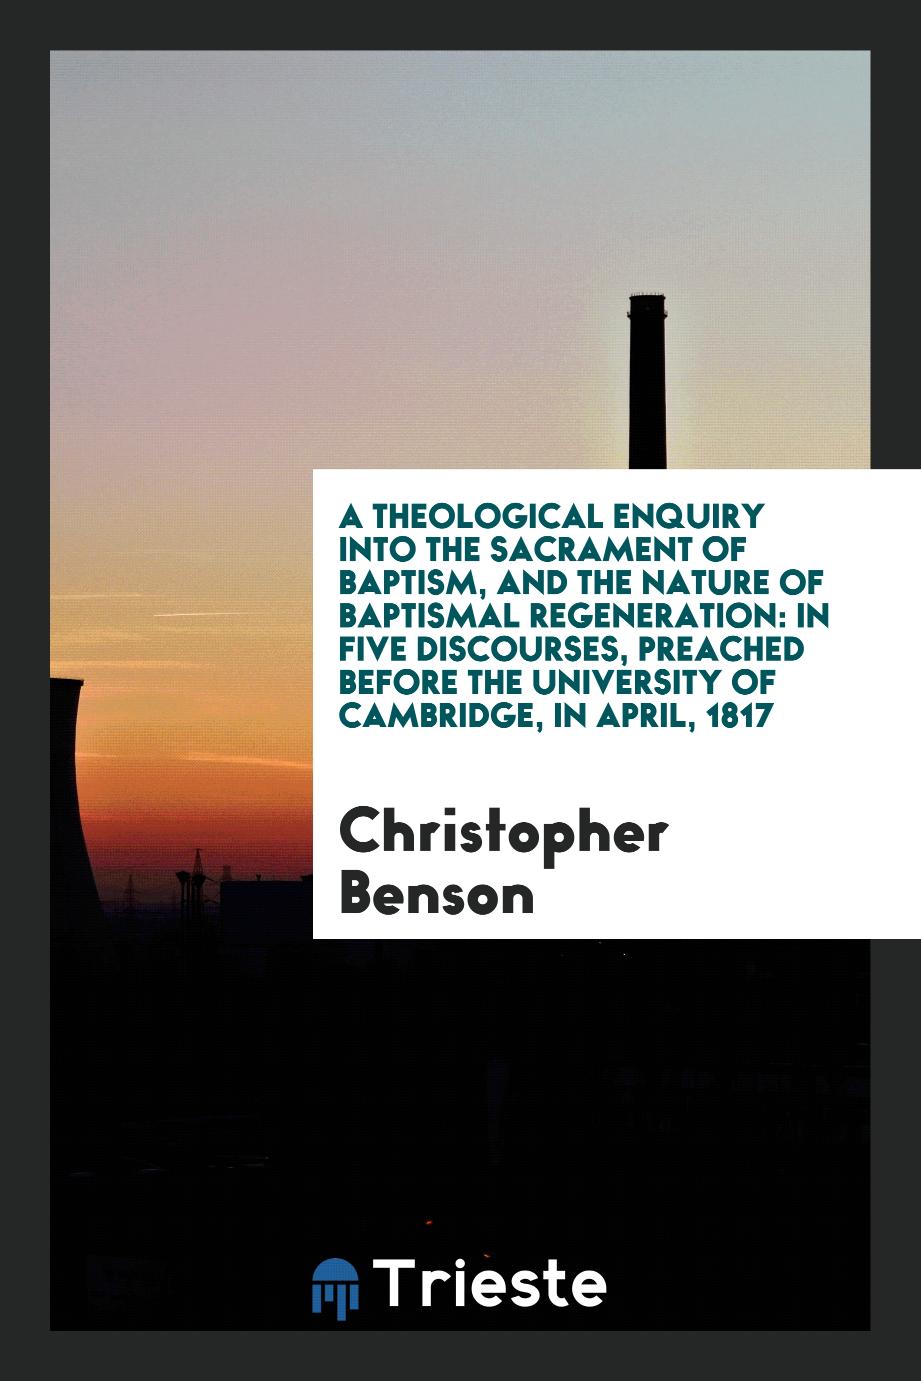 A Theological Enquiry into the Sacrament of Baptism, and the Nature of Baptismal Regeneration: In Five Discourses, Preached Before the University of Cambridge, in April, 1817